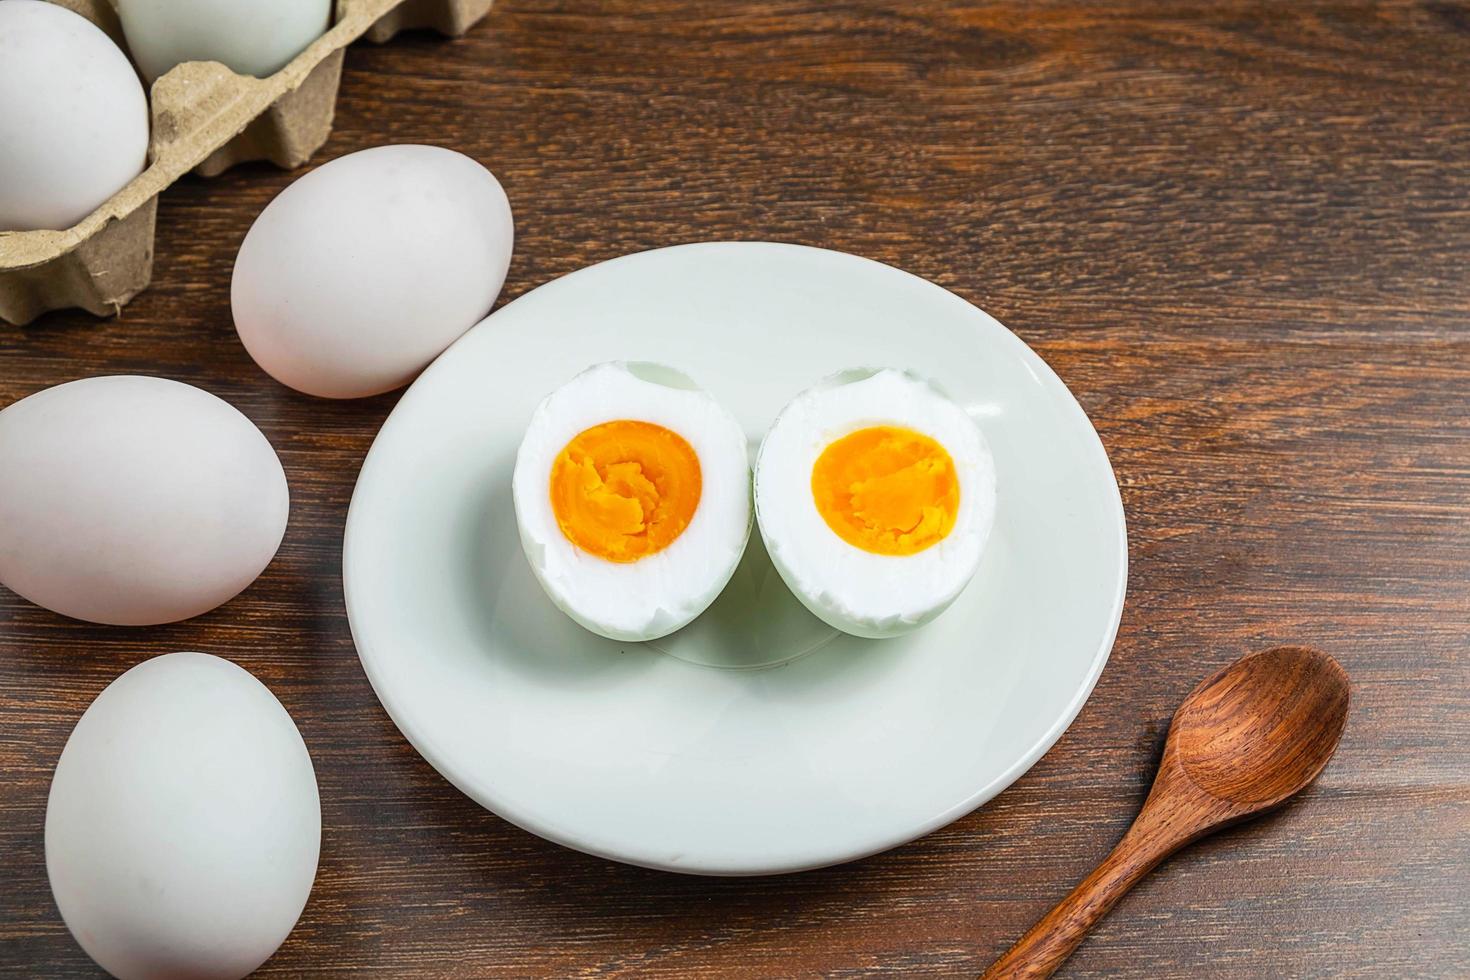 Sliced hard-boiled duck egg on a white plate next to whole eggs in a carton on a wooden table photo